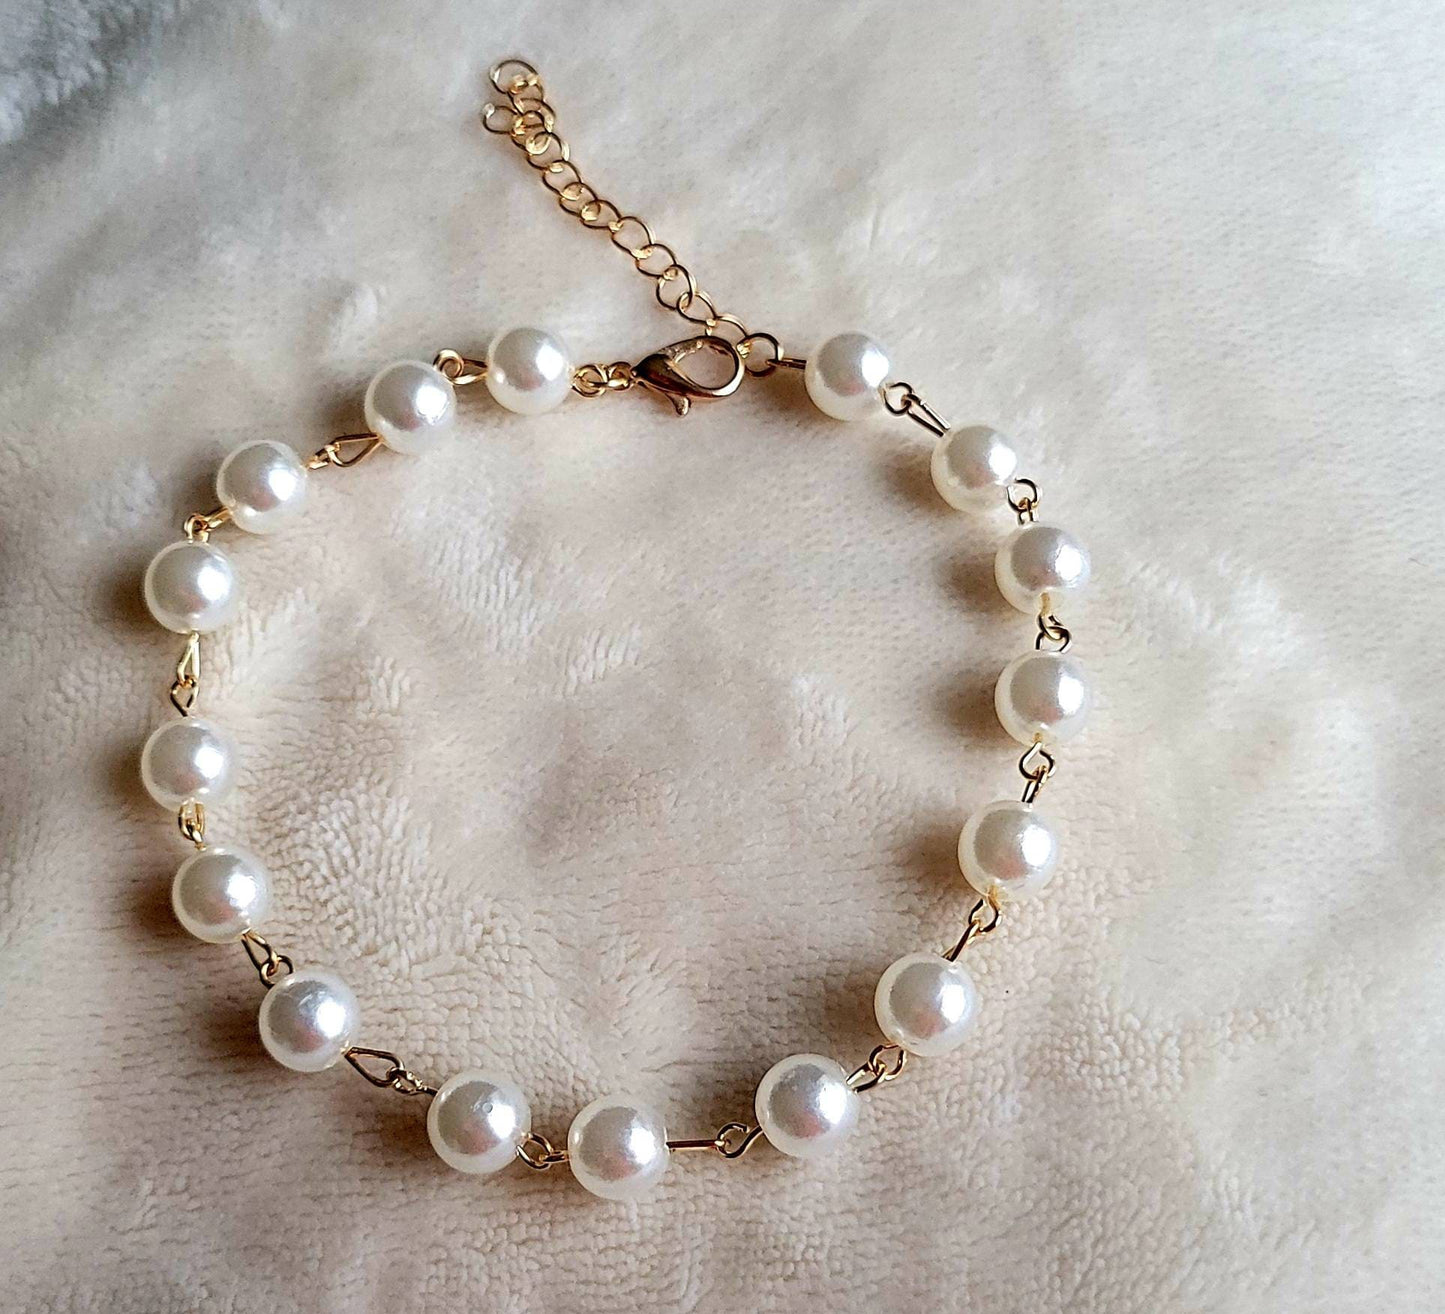 Pearl anklet anklet for women ankle bracelet foot jewelry, minimal jewelry bridal anklet, dainty anklet,anklace,gold pearl freshwater anklet